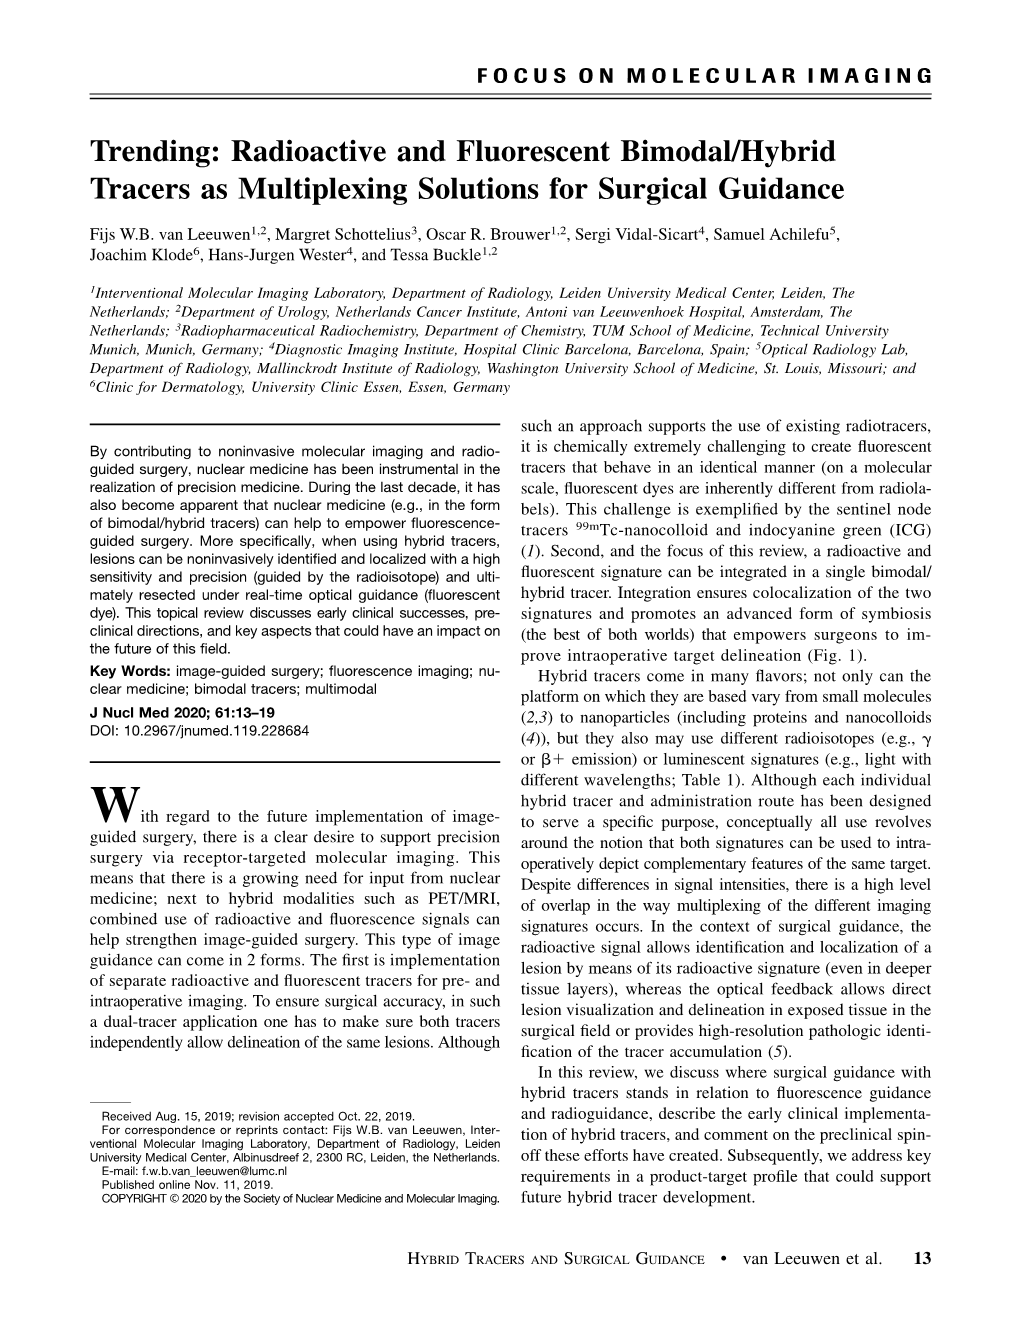 Trending: Radioactive and Fluorescent Bimodal/Hybrid Tracers As Multiplexing Solutions for Surgical Guidance